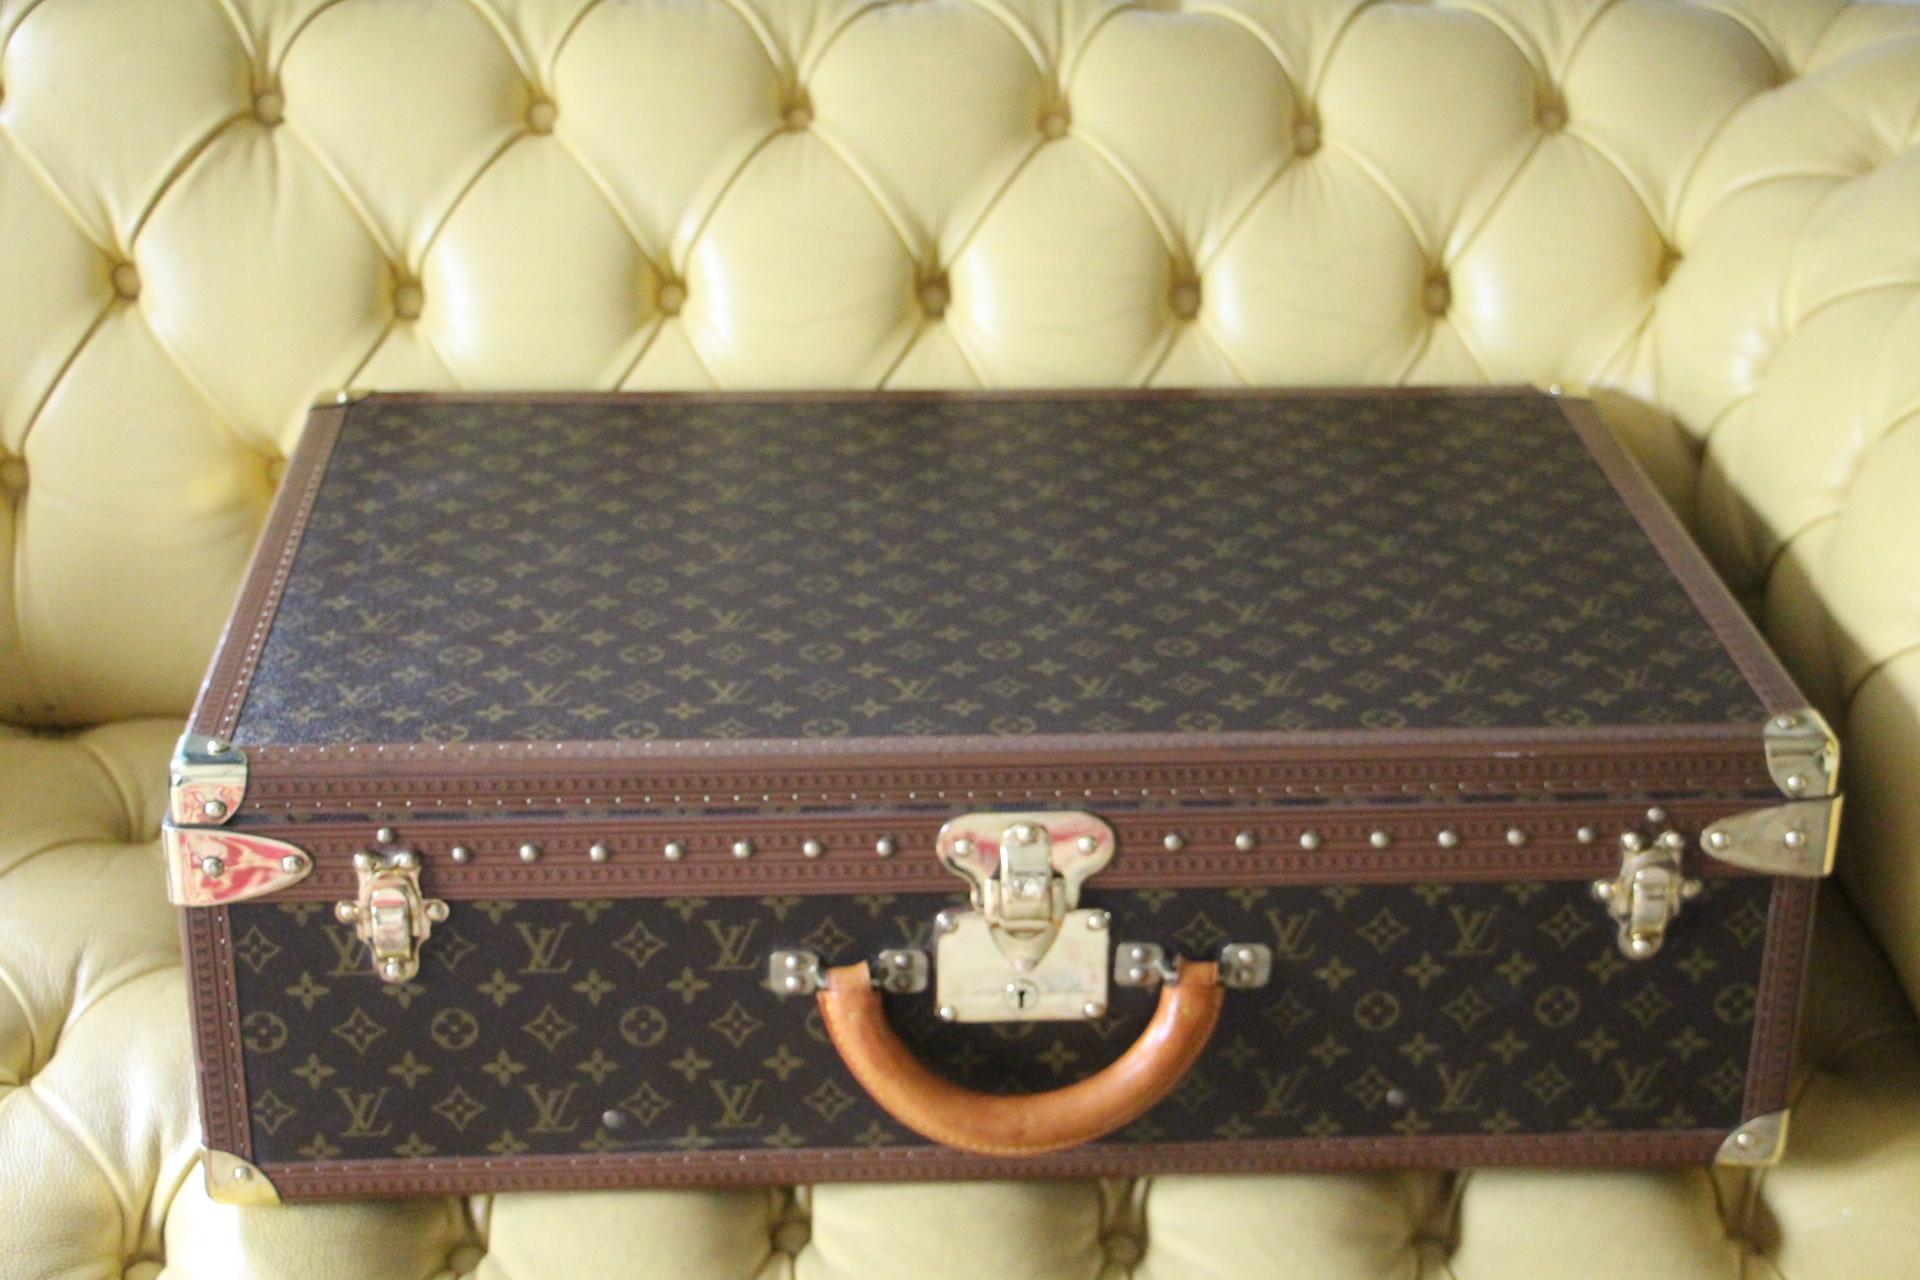 Magnificent Louis Vuitton Alzer monogramm suitcase.
All Louis Vuitton stamped solid brass fittings: locks, clasps and studs.
Superb interior, all original with its removable tray, its Louis Vuitton label and its serial number. Clean and no